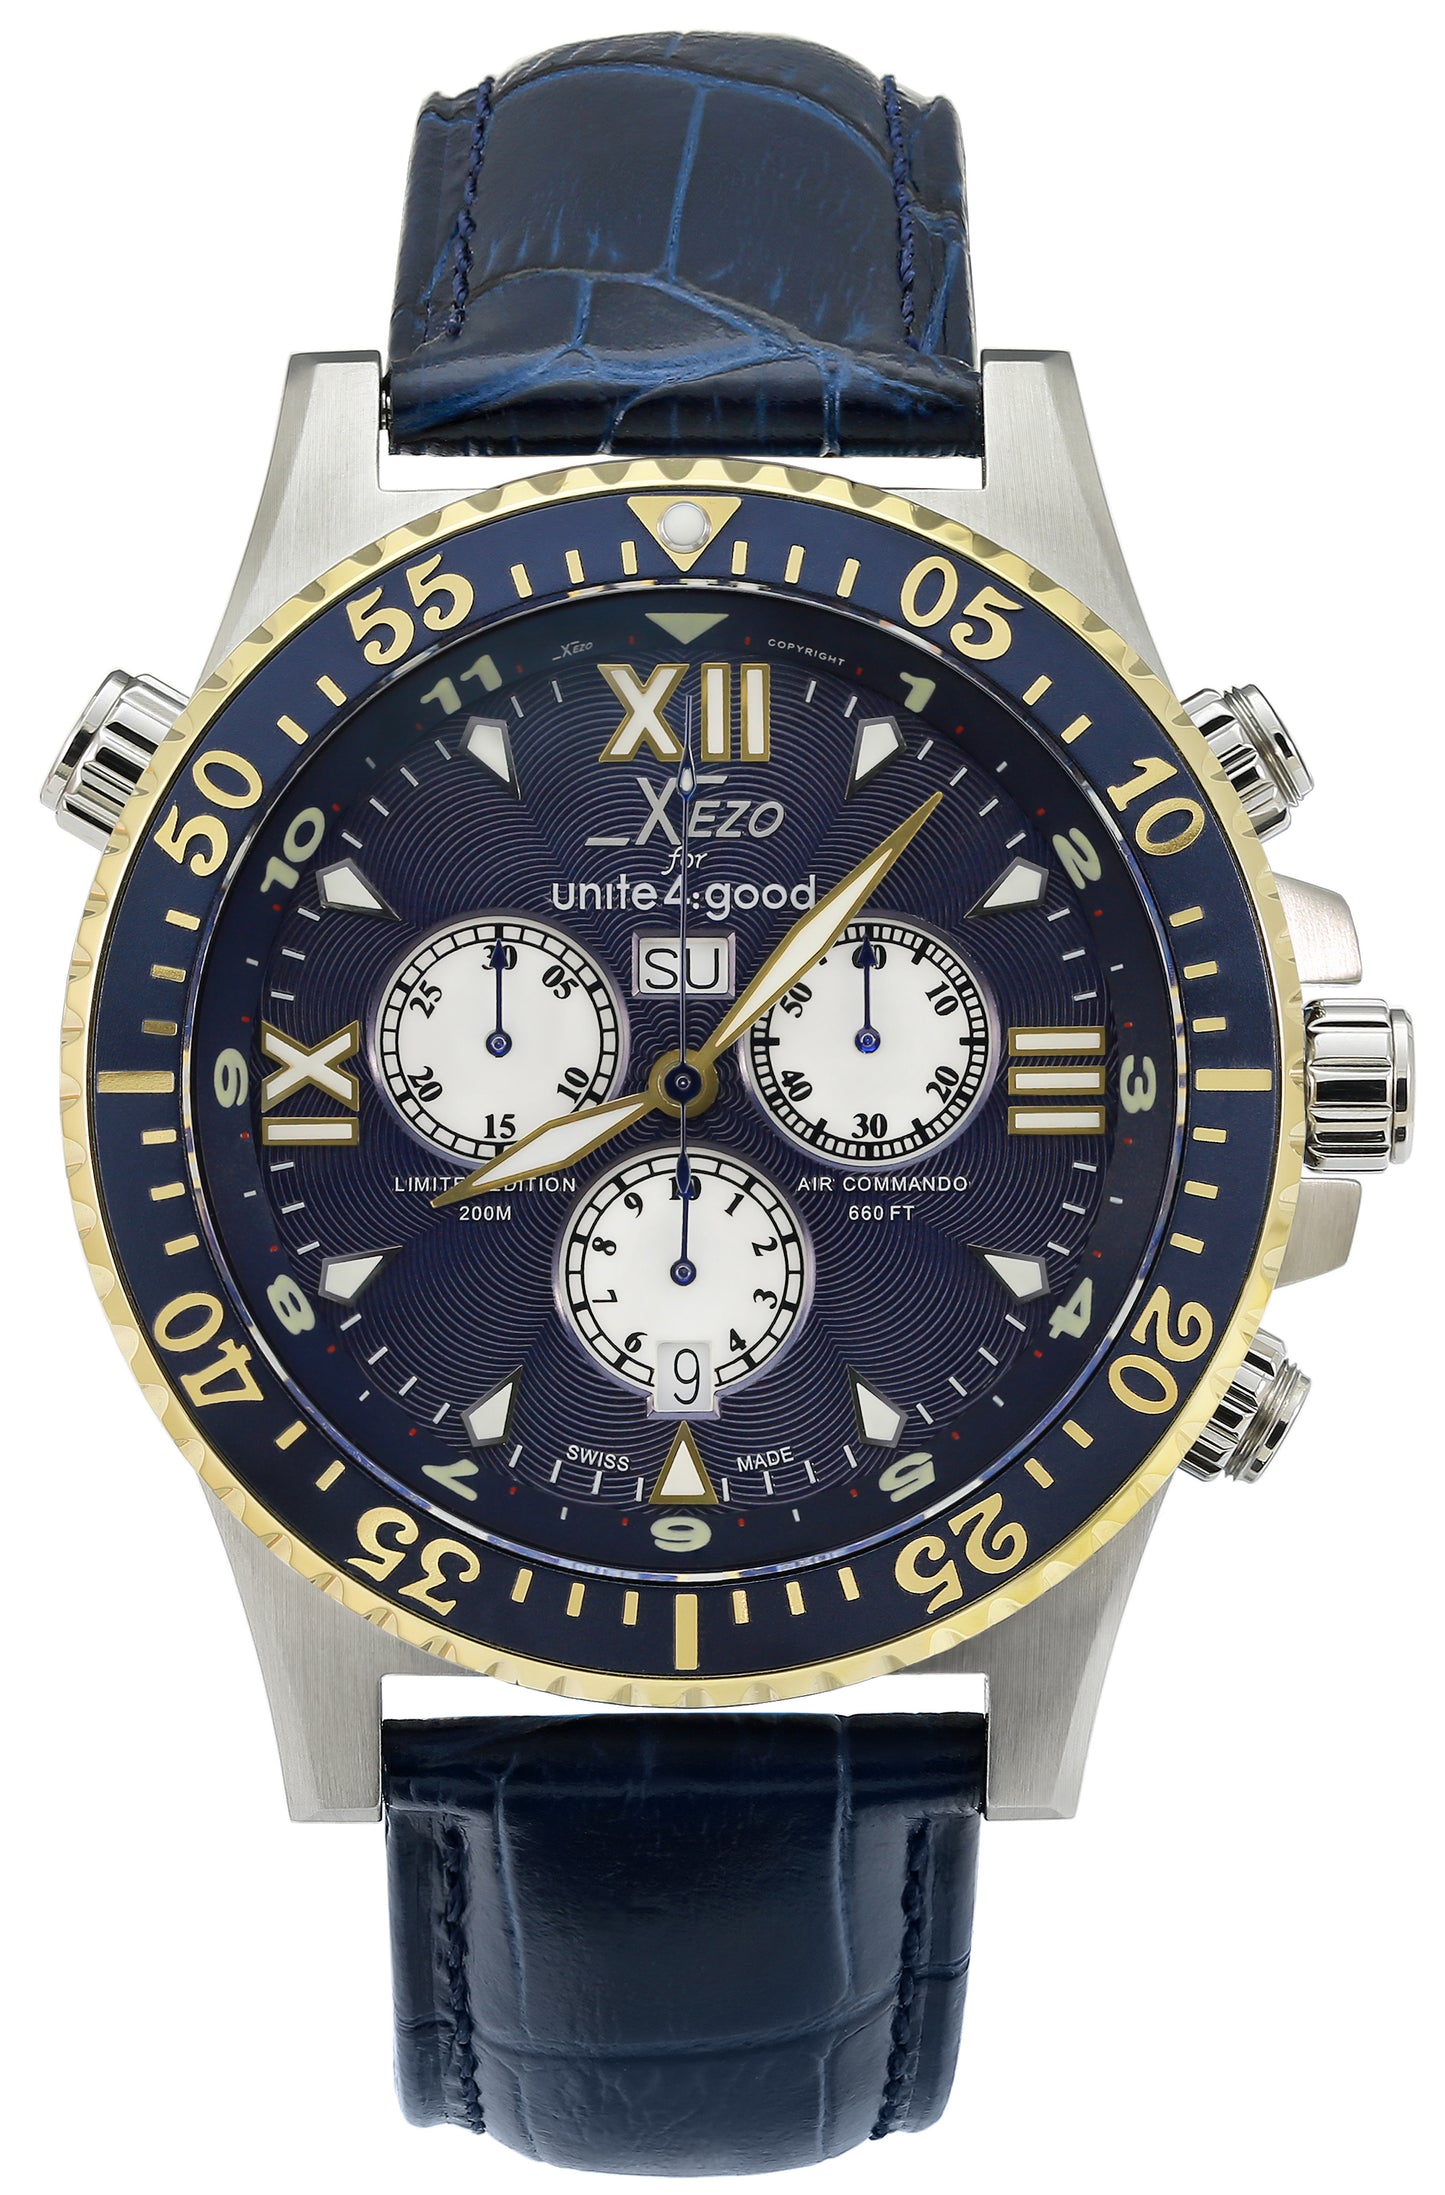 Xezo - Front view of the Air Commando D45-BUL watch with dark blue leather strap